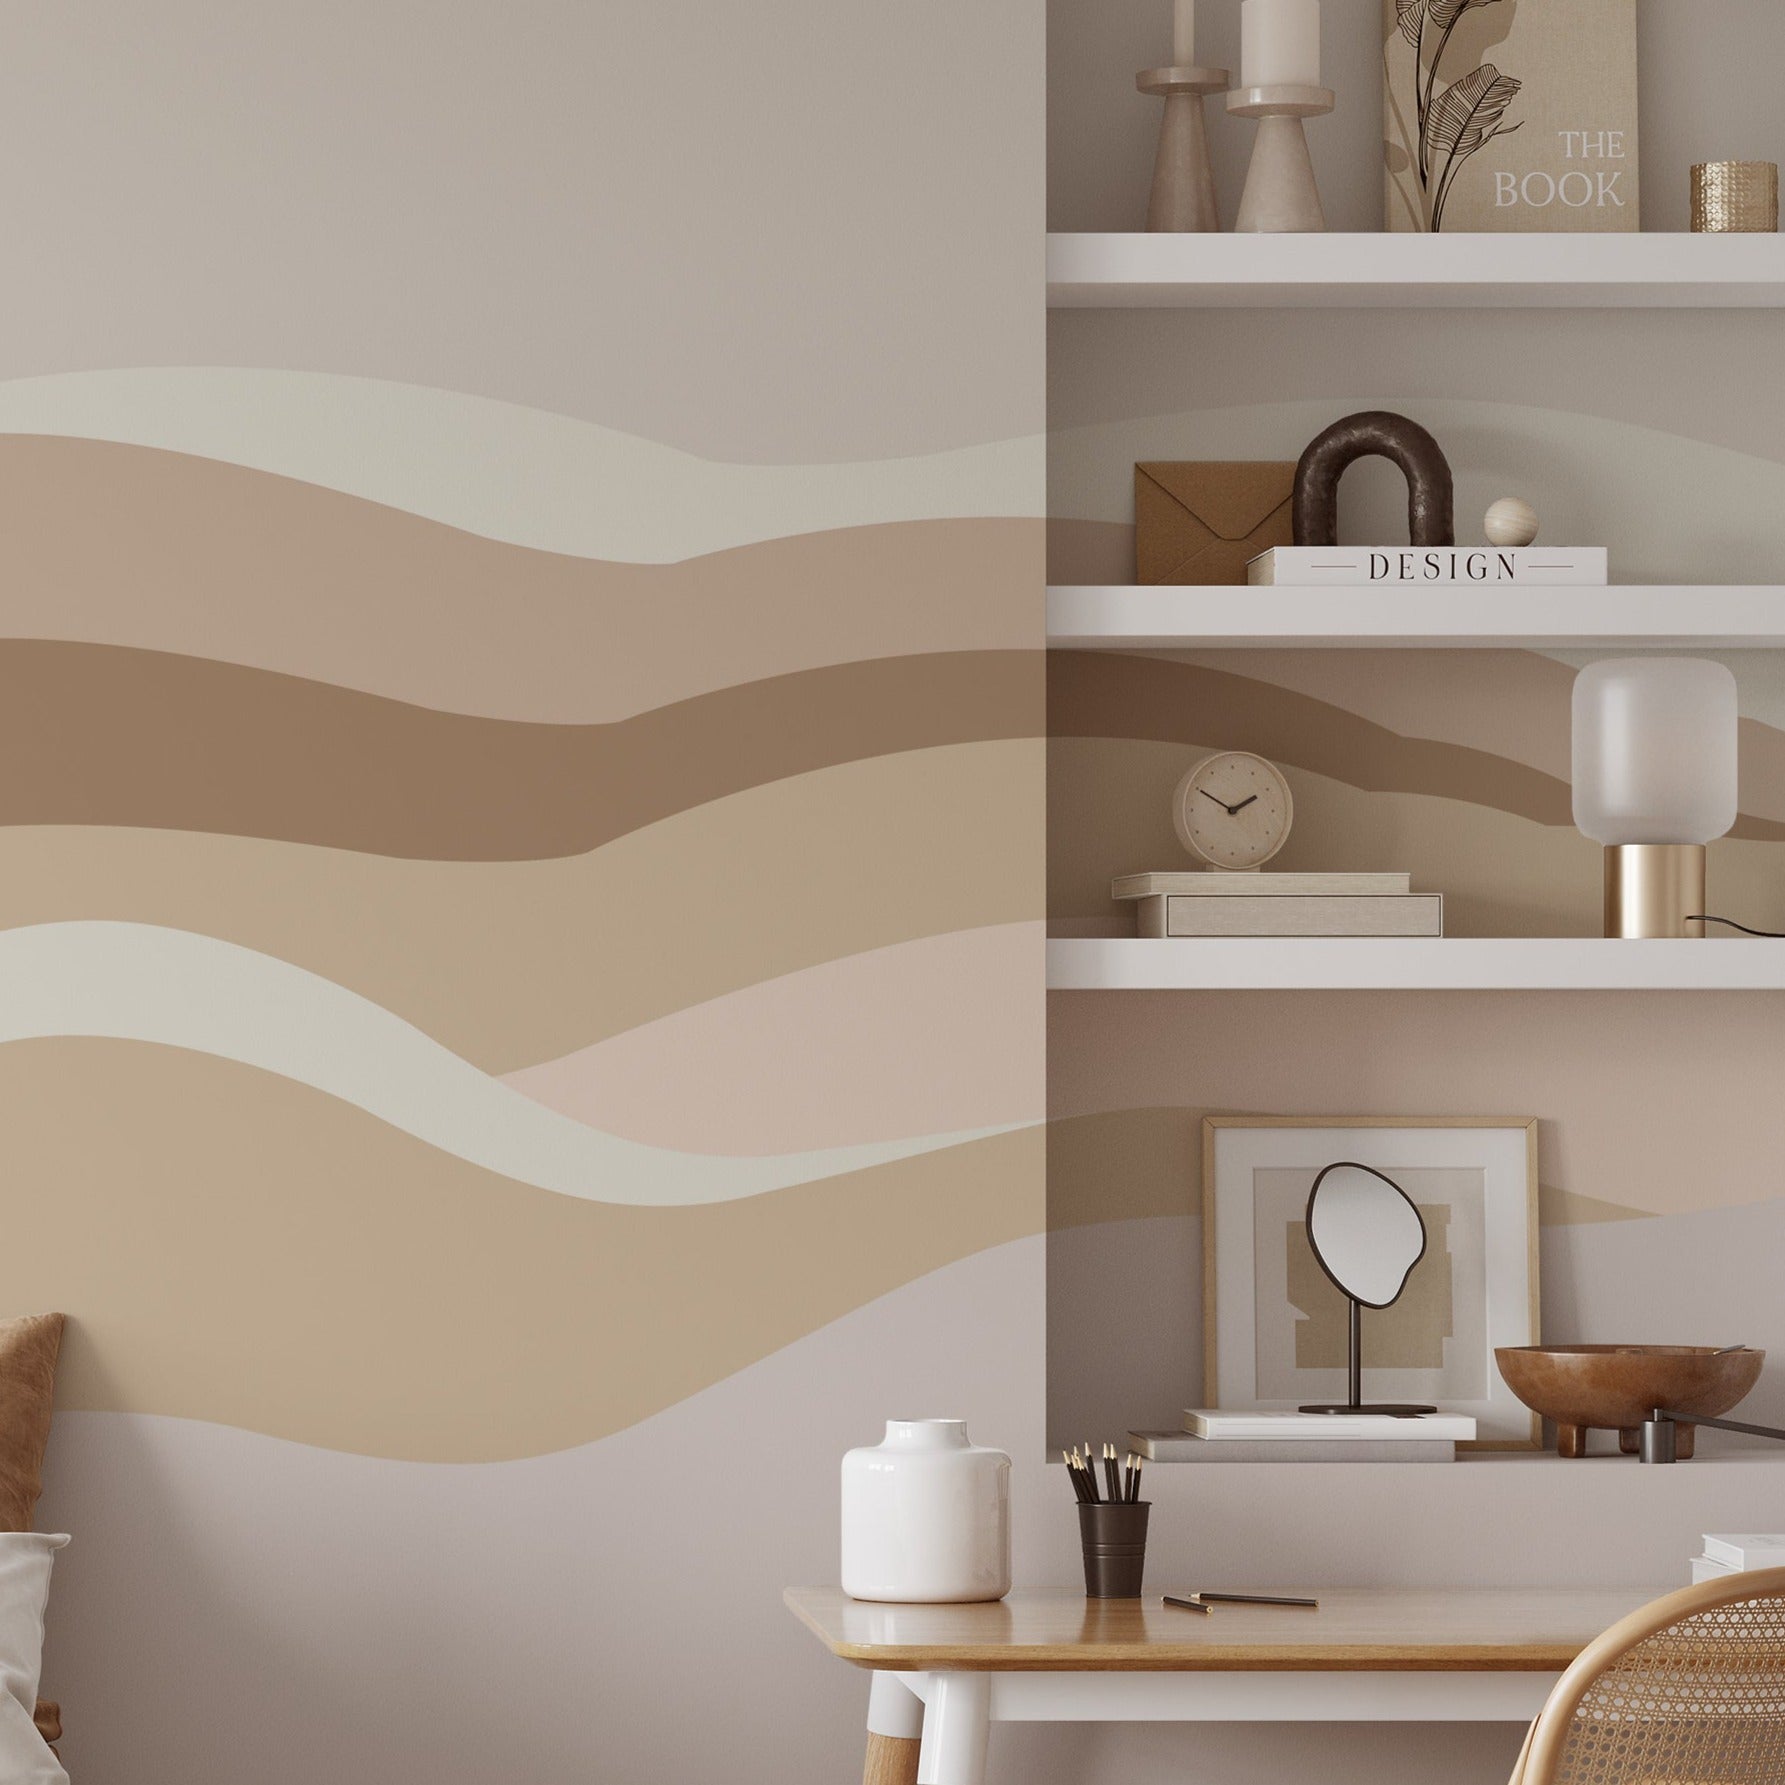 Modern Landscape Wall Mural Wallpaper featuring abstract wavy lines in neutral tones of beige, brown, and cream, enhancing the decor of a bedroom with a study area and stylish shelving